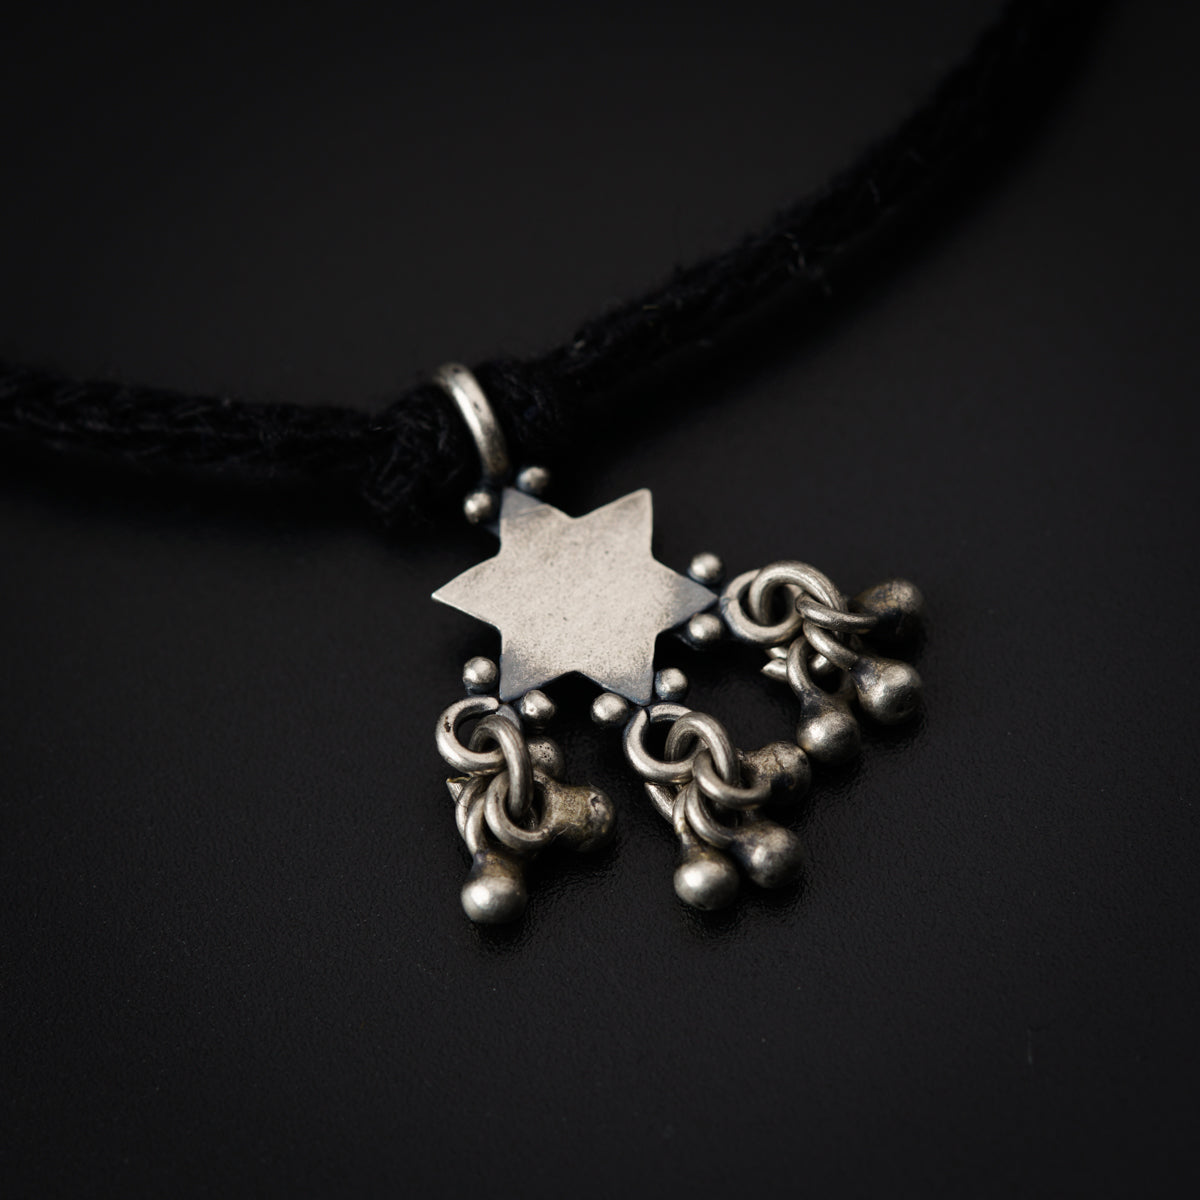 a necklace with a star of david on it